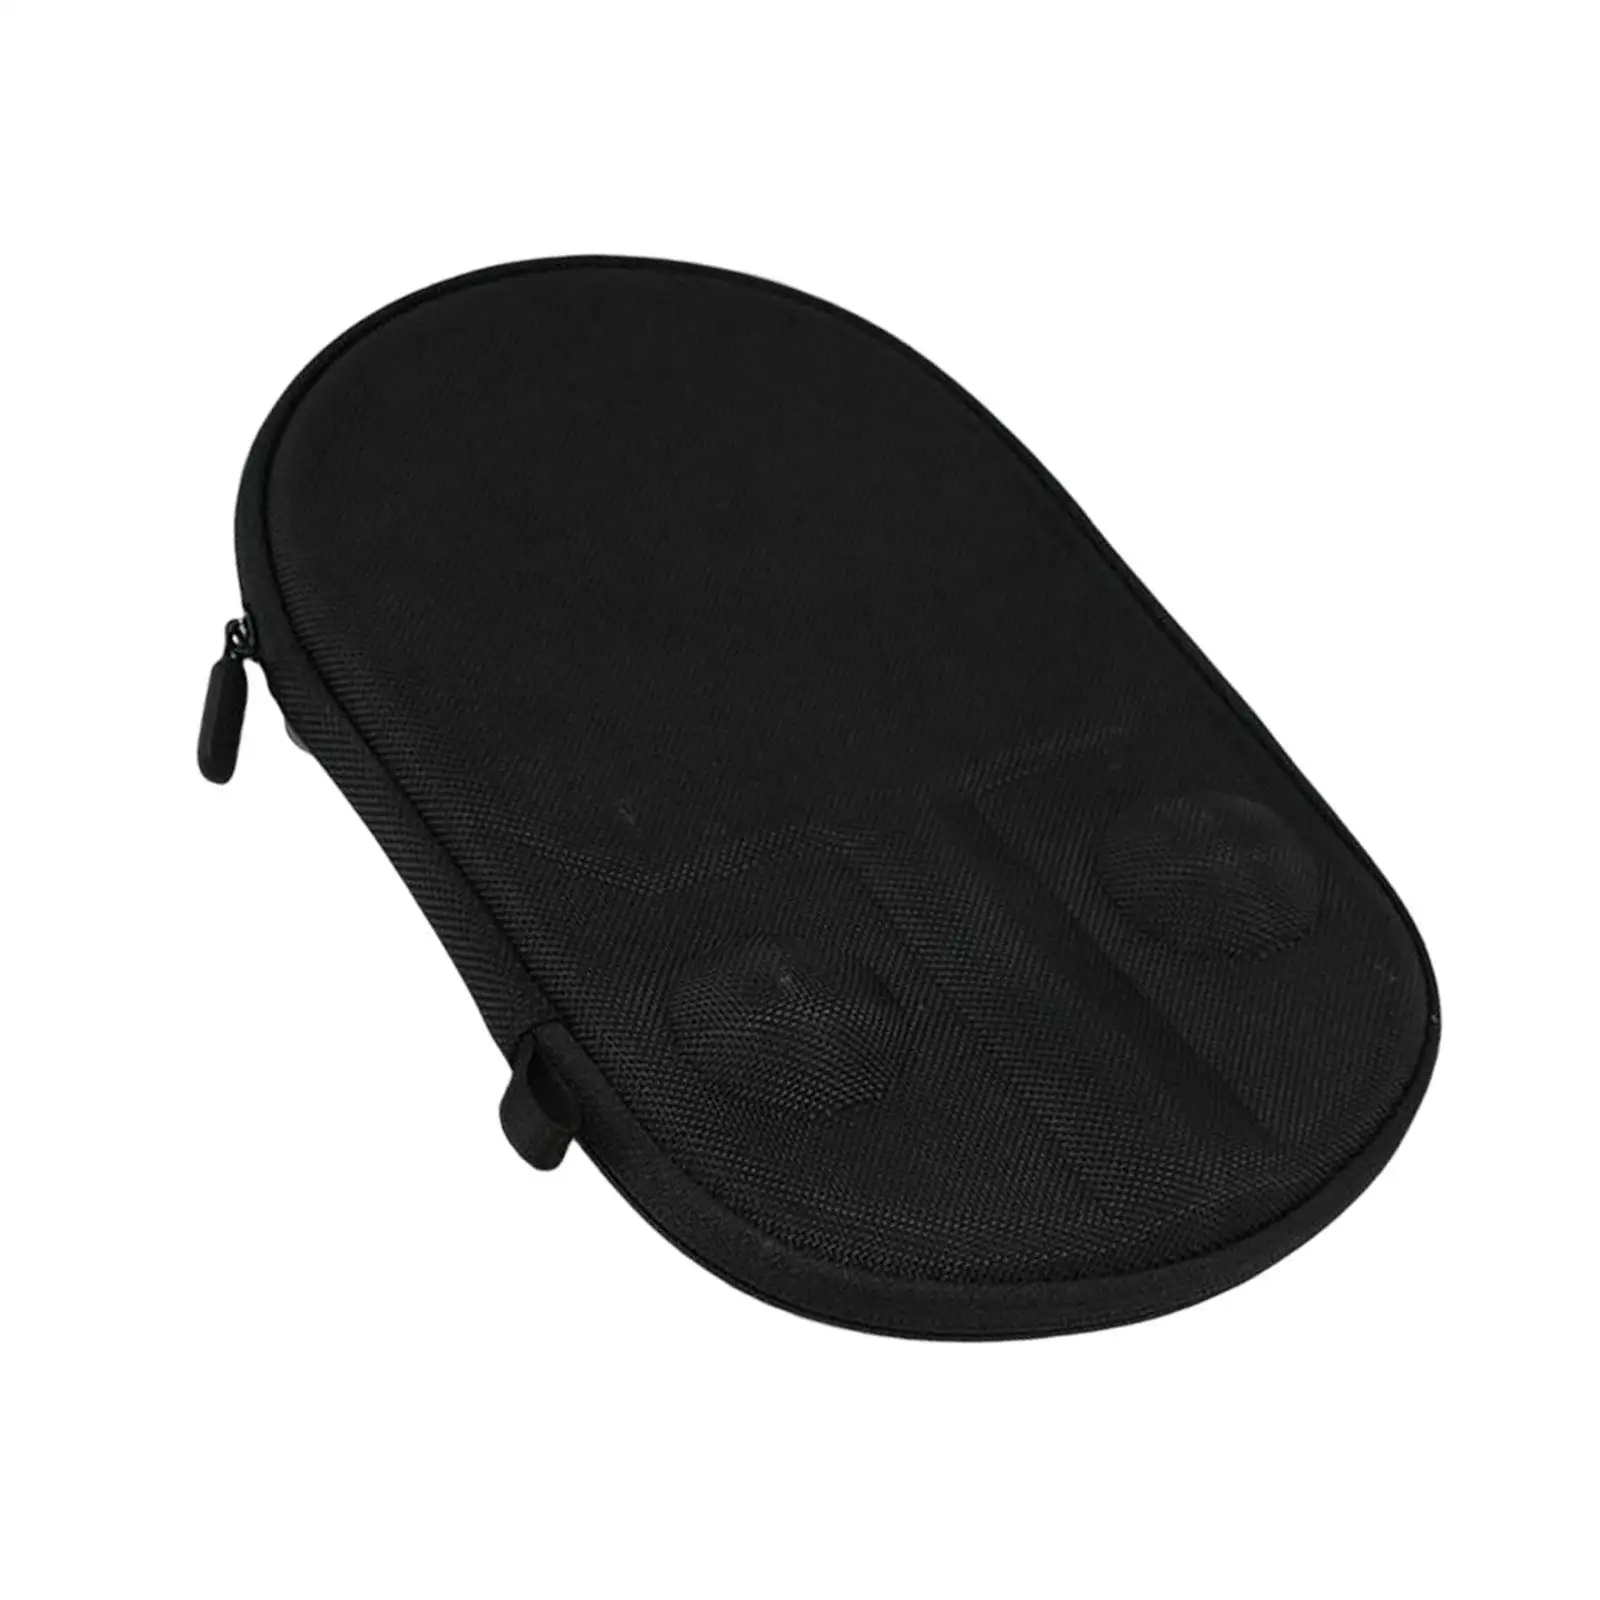 Multifunction Table Tennis Racket Bag Lightweight Storage Case Table Tennis Protector Reusable Wear Resistant for Travel Indoor